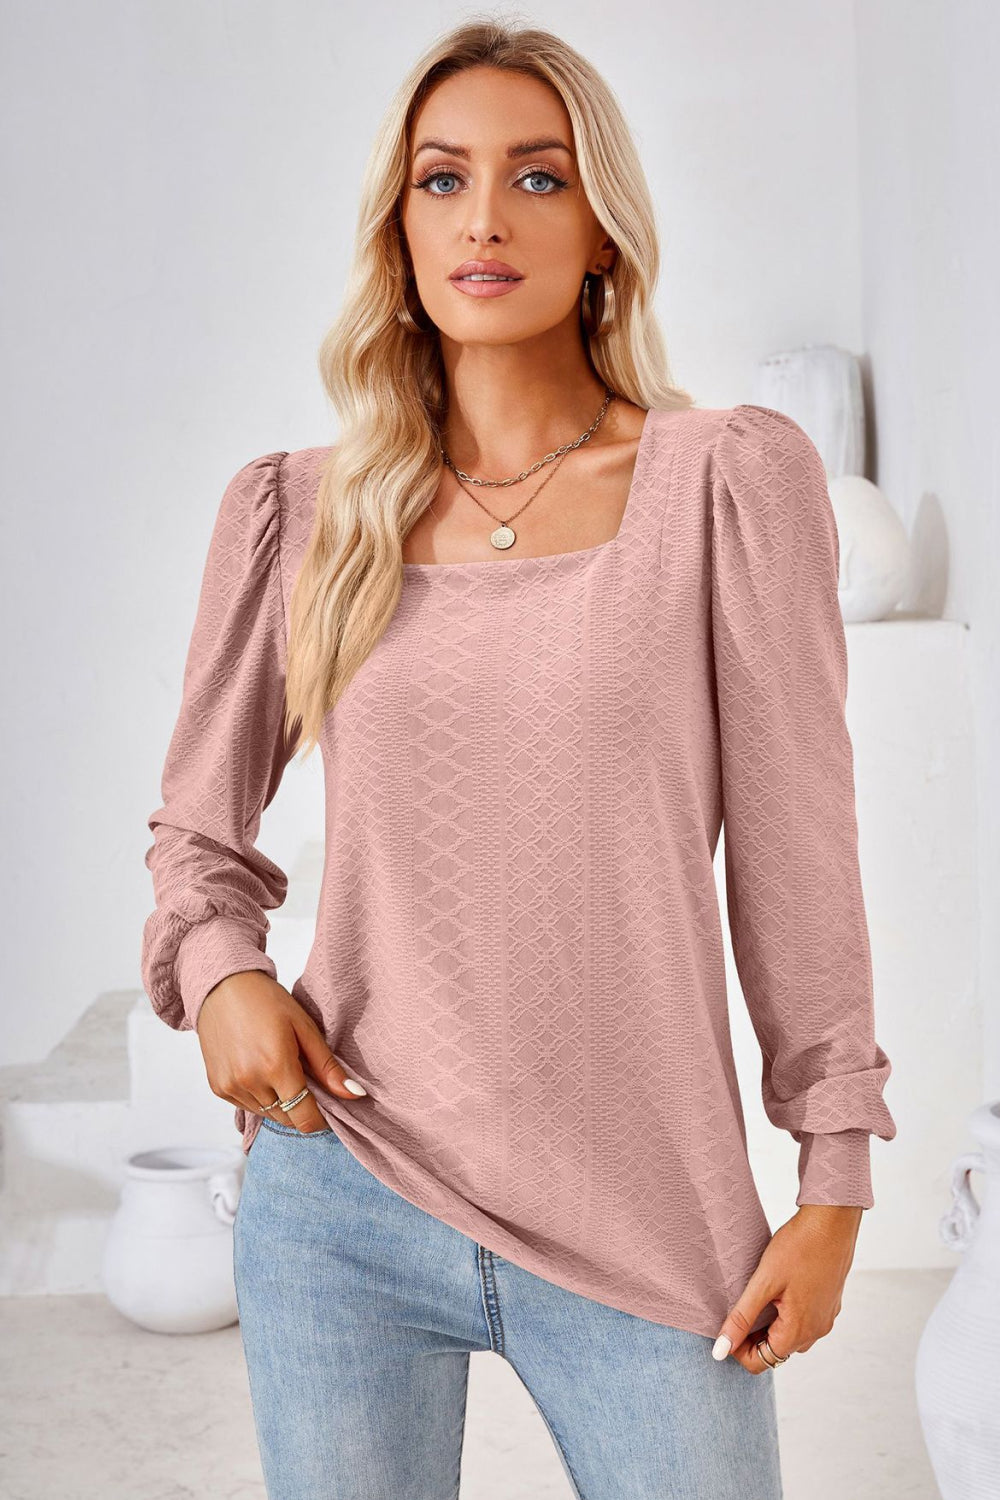 Square Neck Puff Sleeve Blouse - Women’s Clothing & Accessories - Shirts & Tops - 22 - 2024